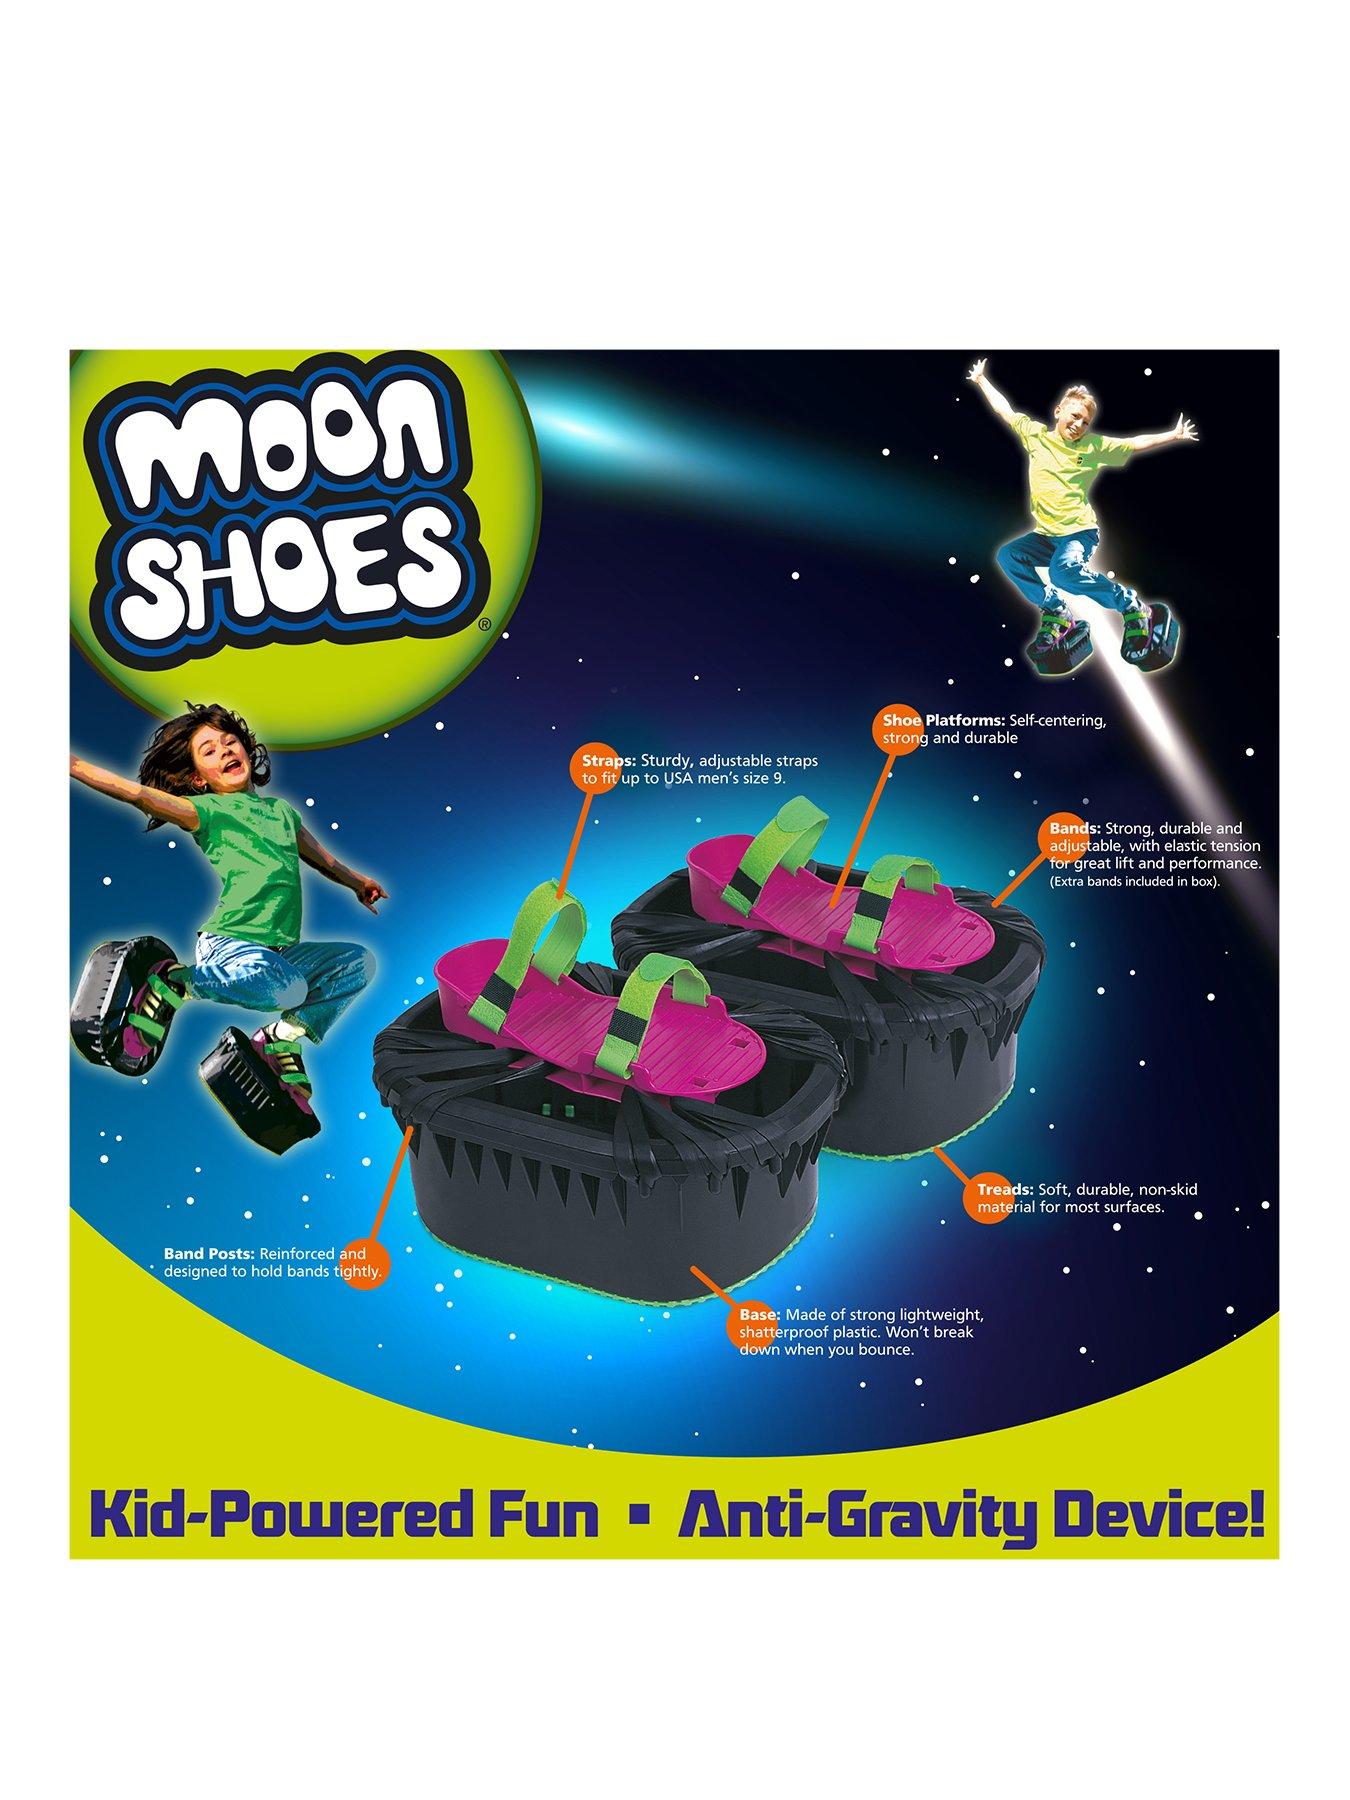 Keeping Active With Moon Shoes